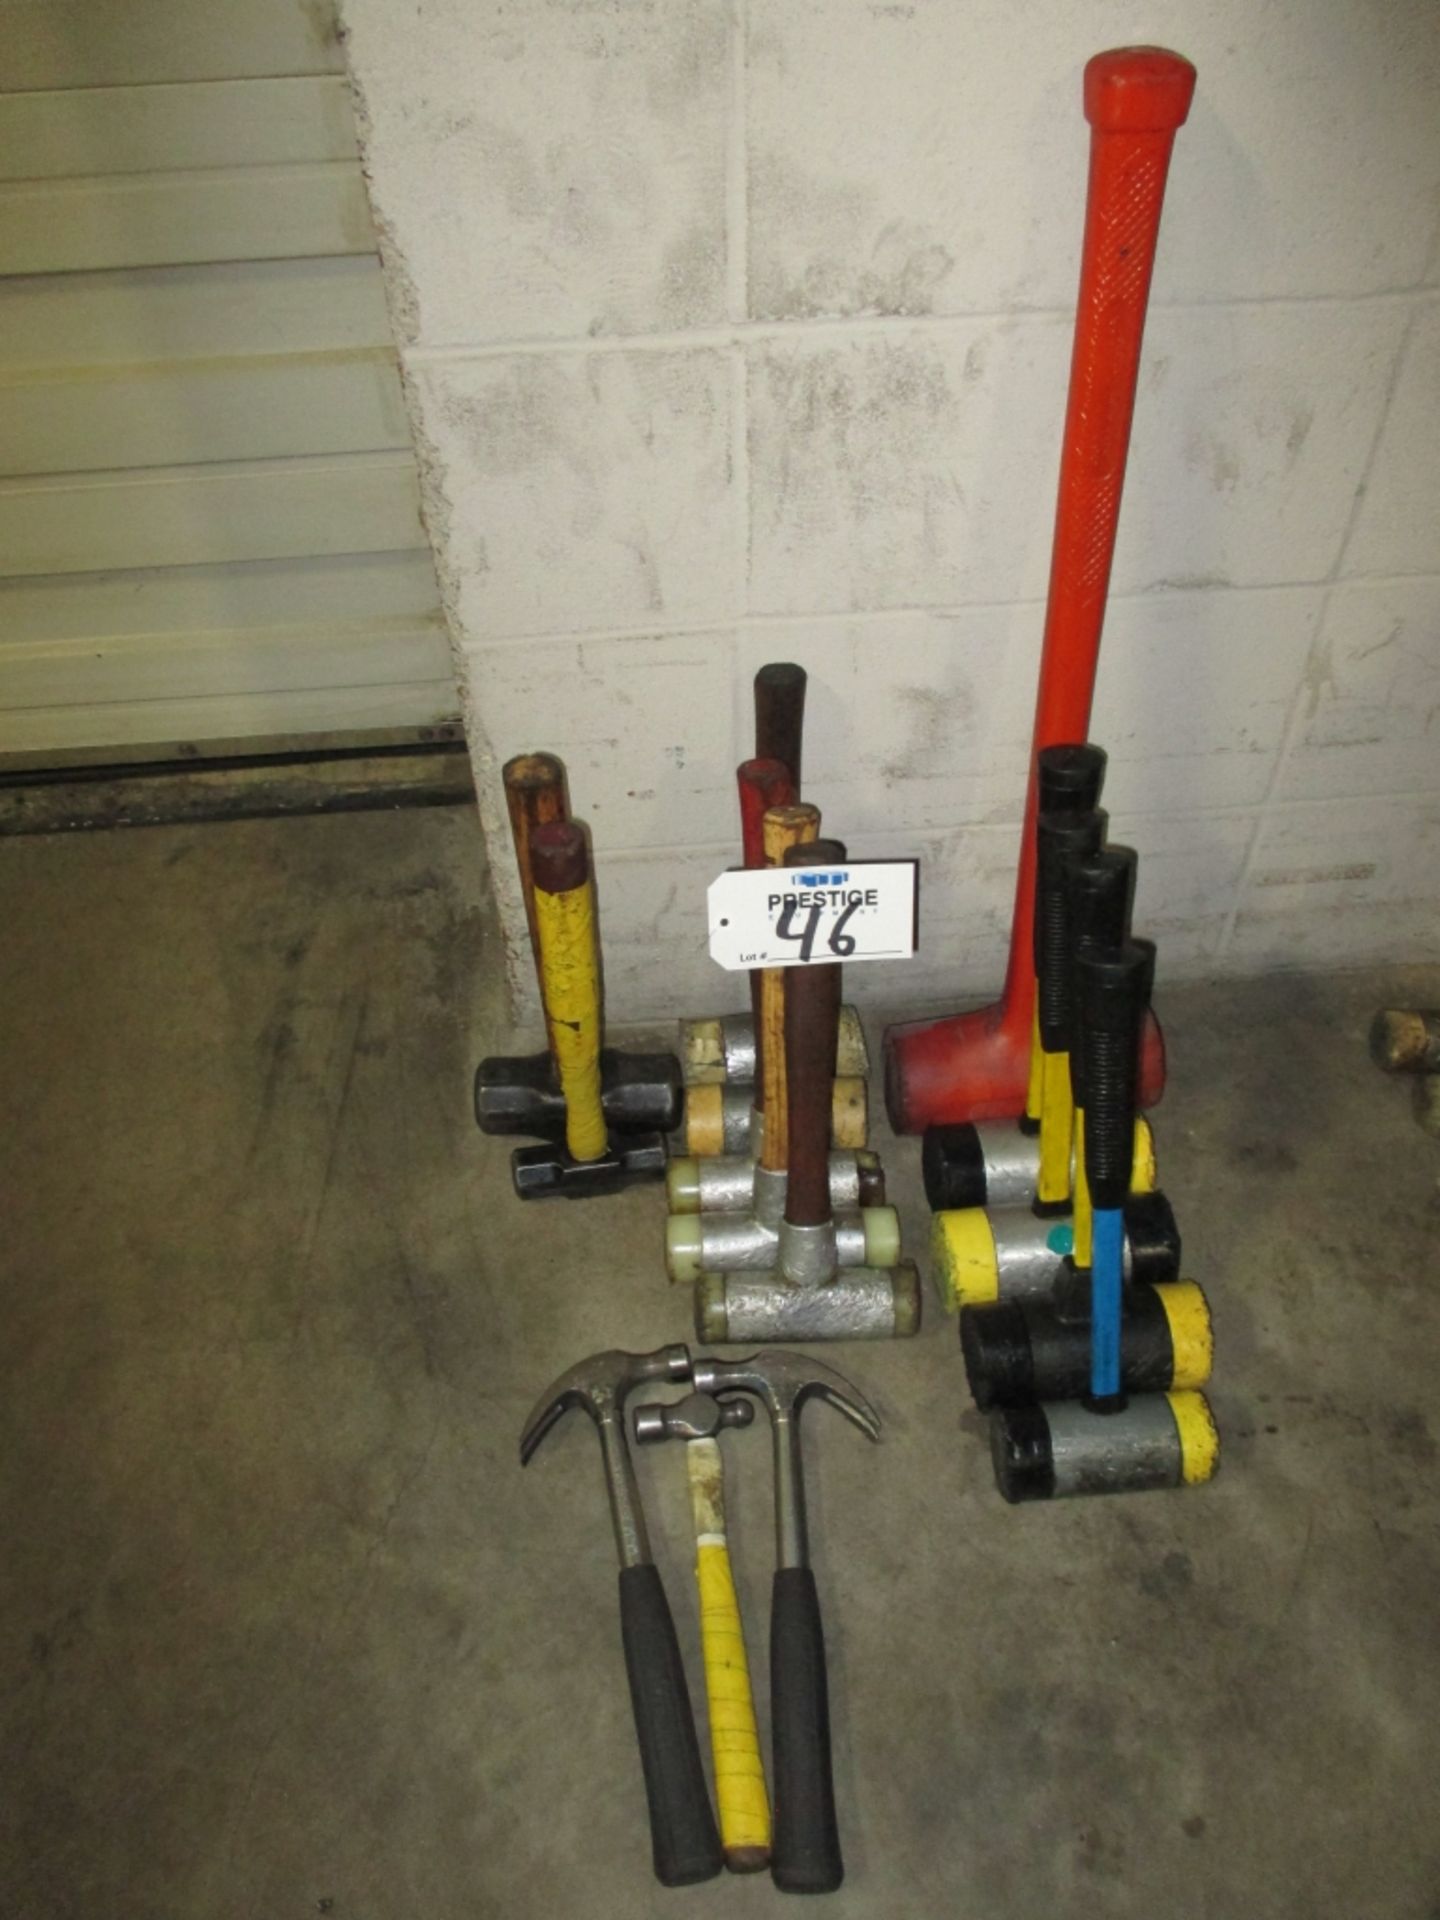 (15) ASSORTED HAMMERS, (15) IN SET 2LB SLEDGEHAMMERS AND DEAD BLOW HAMMERS